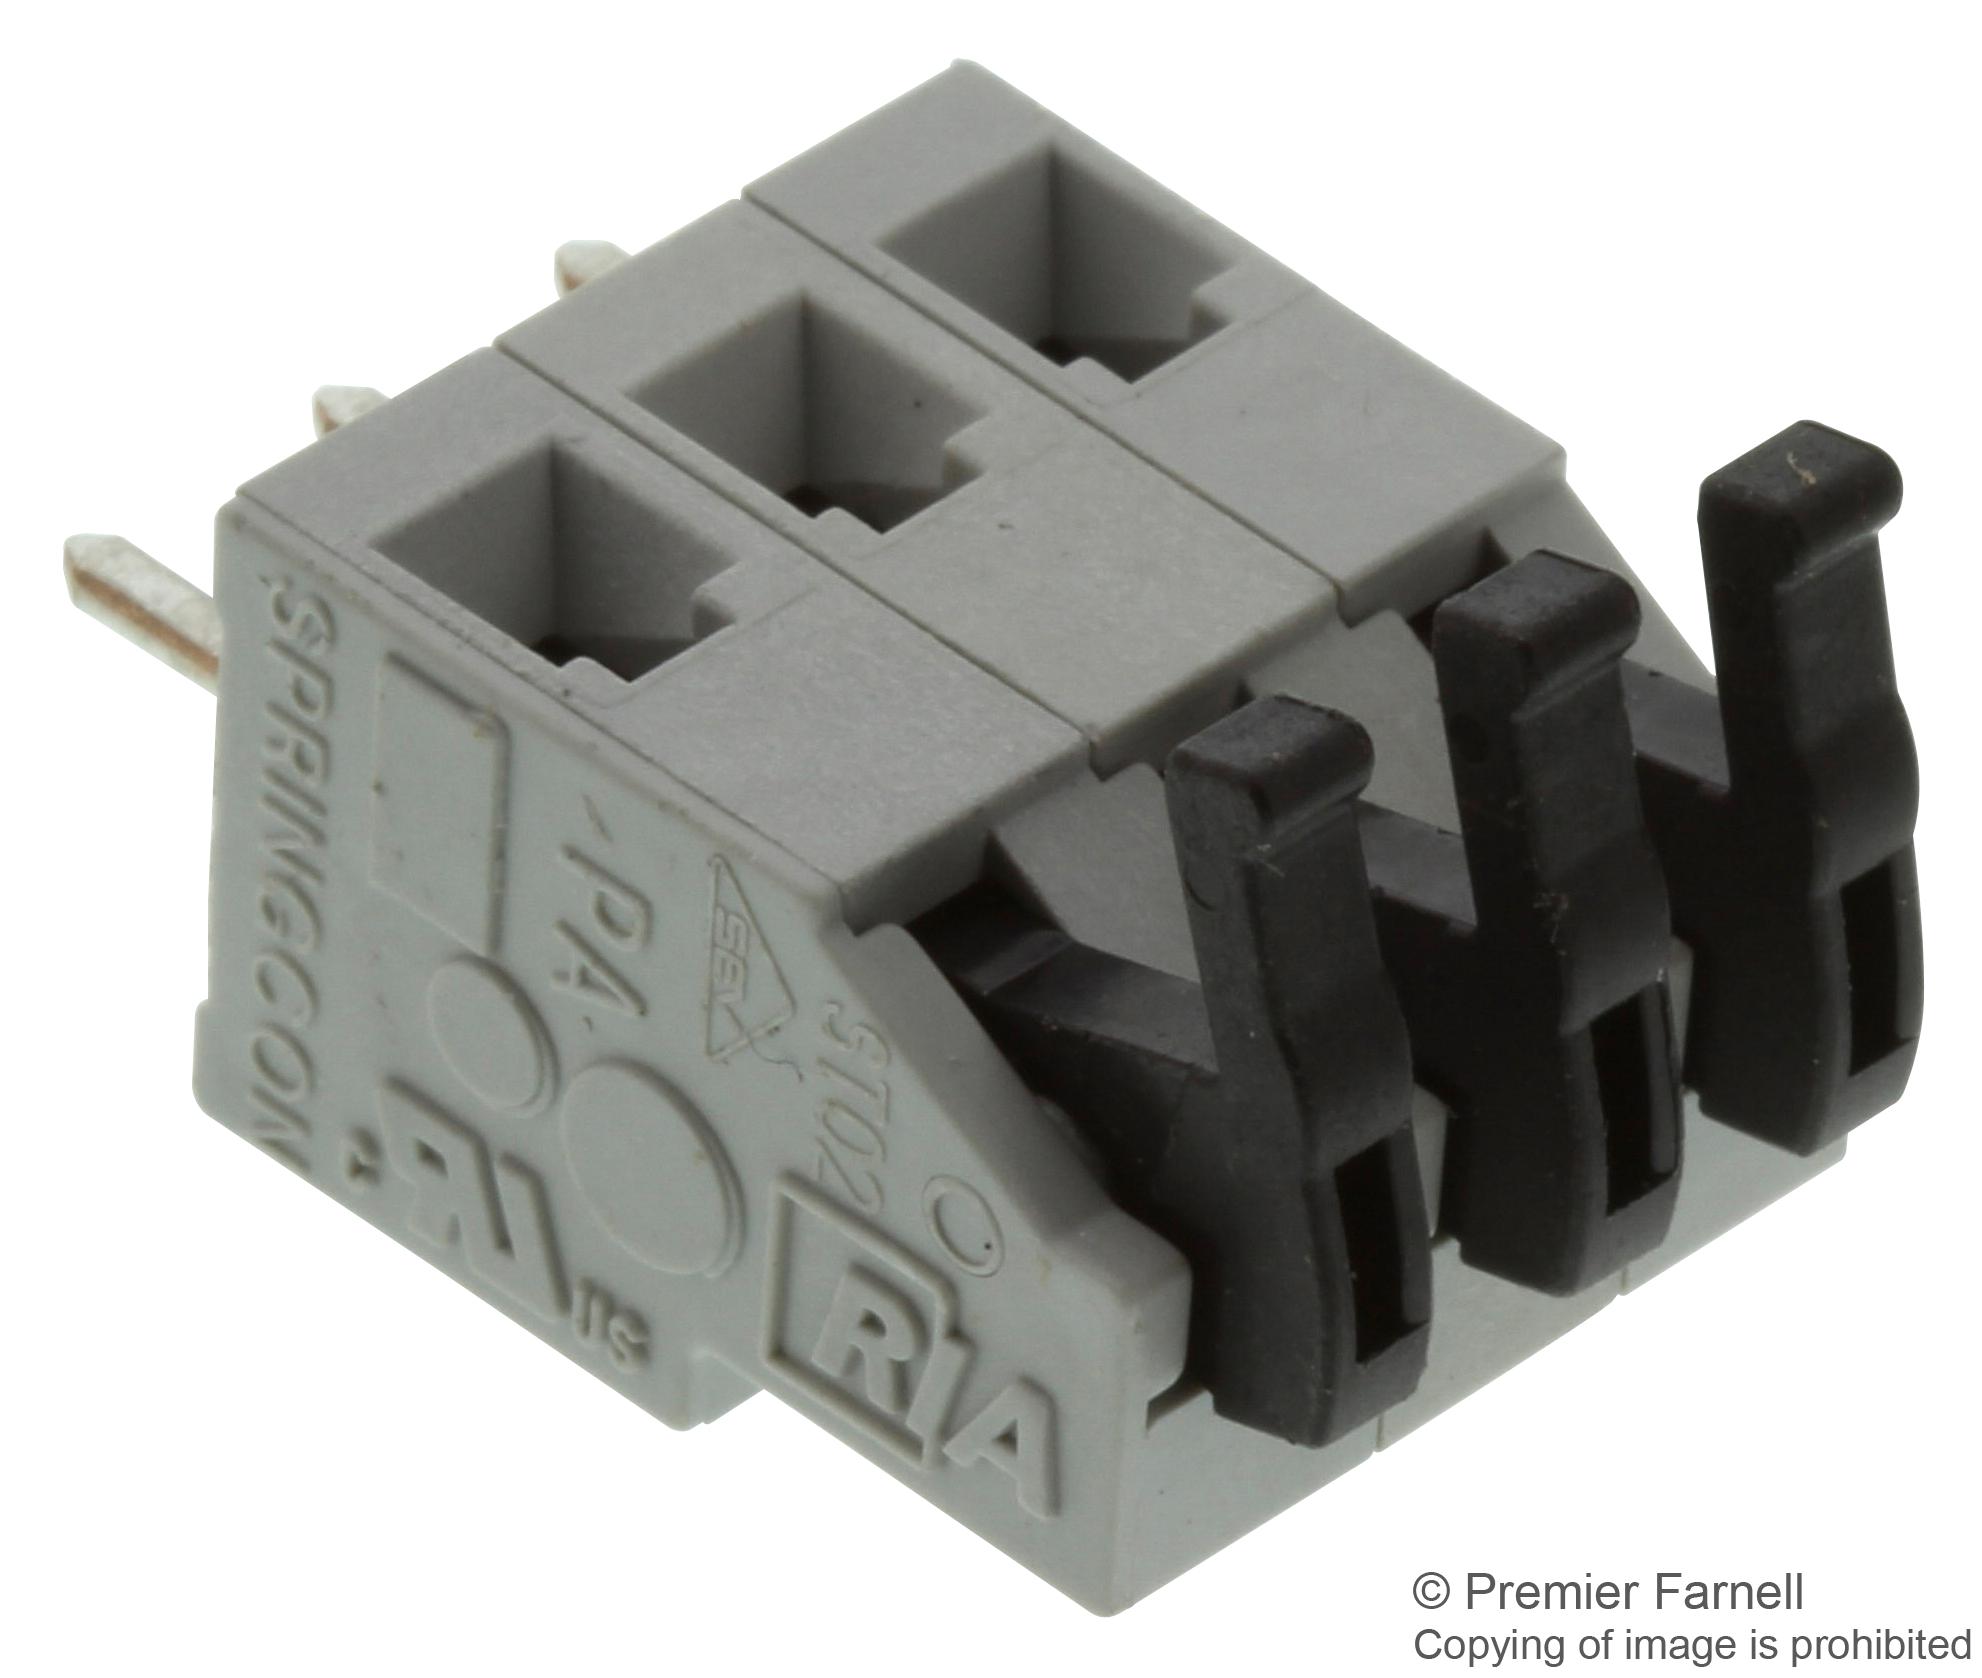 AST0250304 TERMINAL BLOCK, WIRE TO BRD, 3POS, 14AWG METZ CONNECT